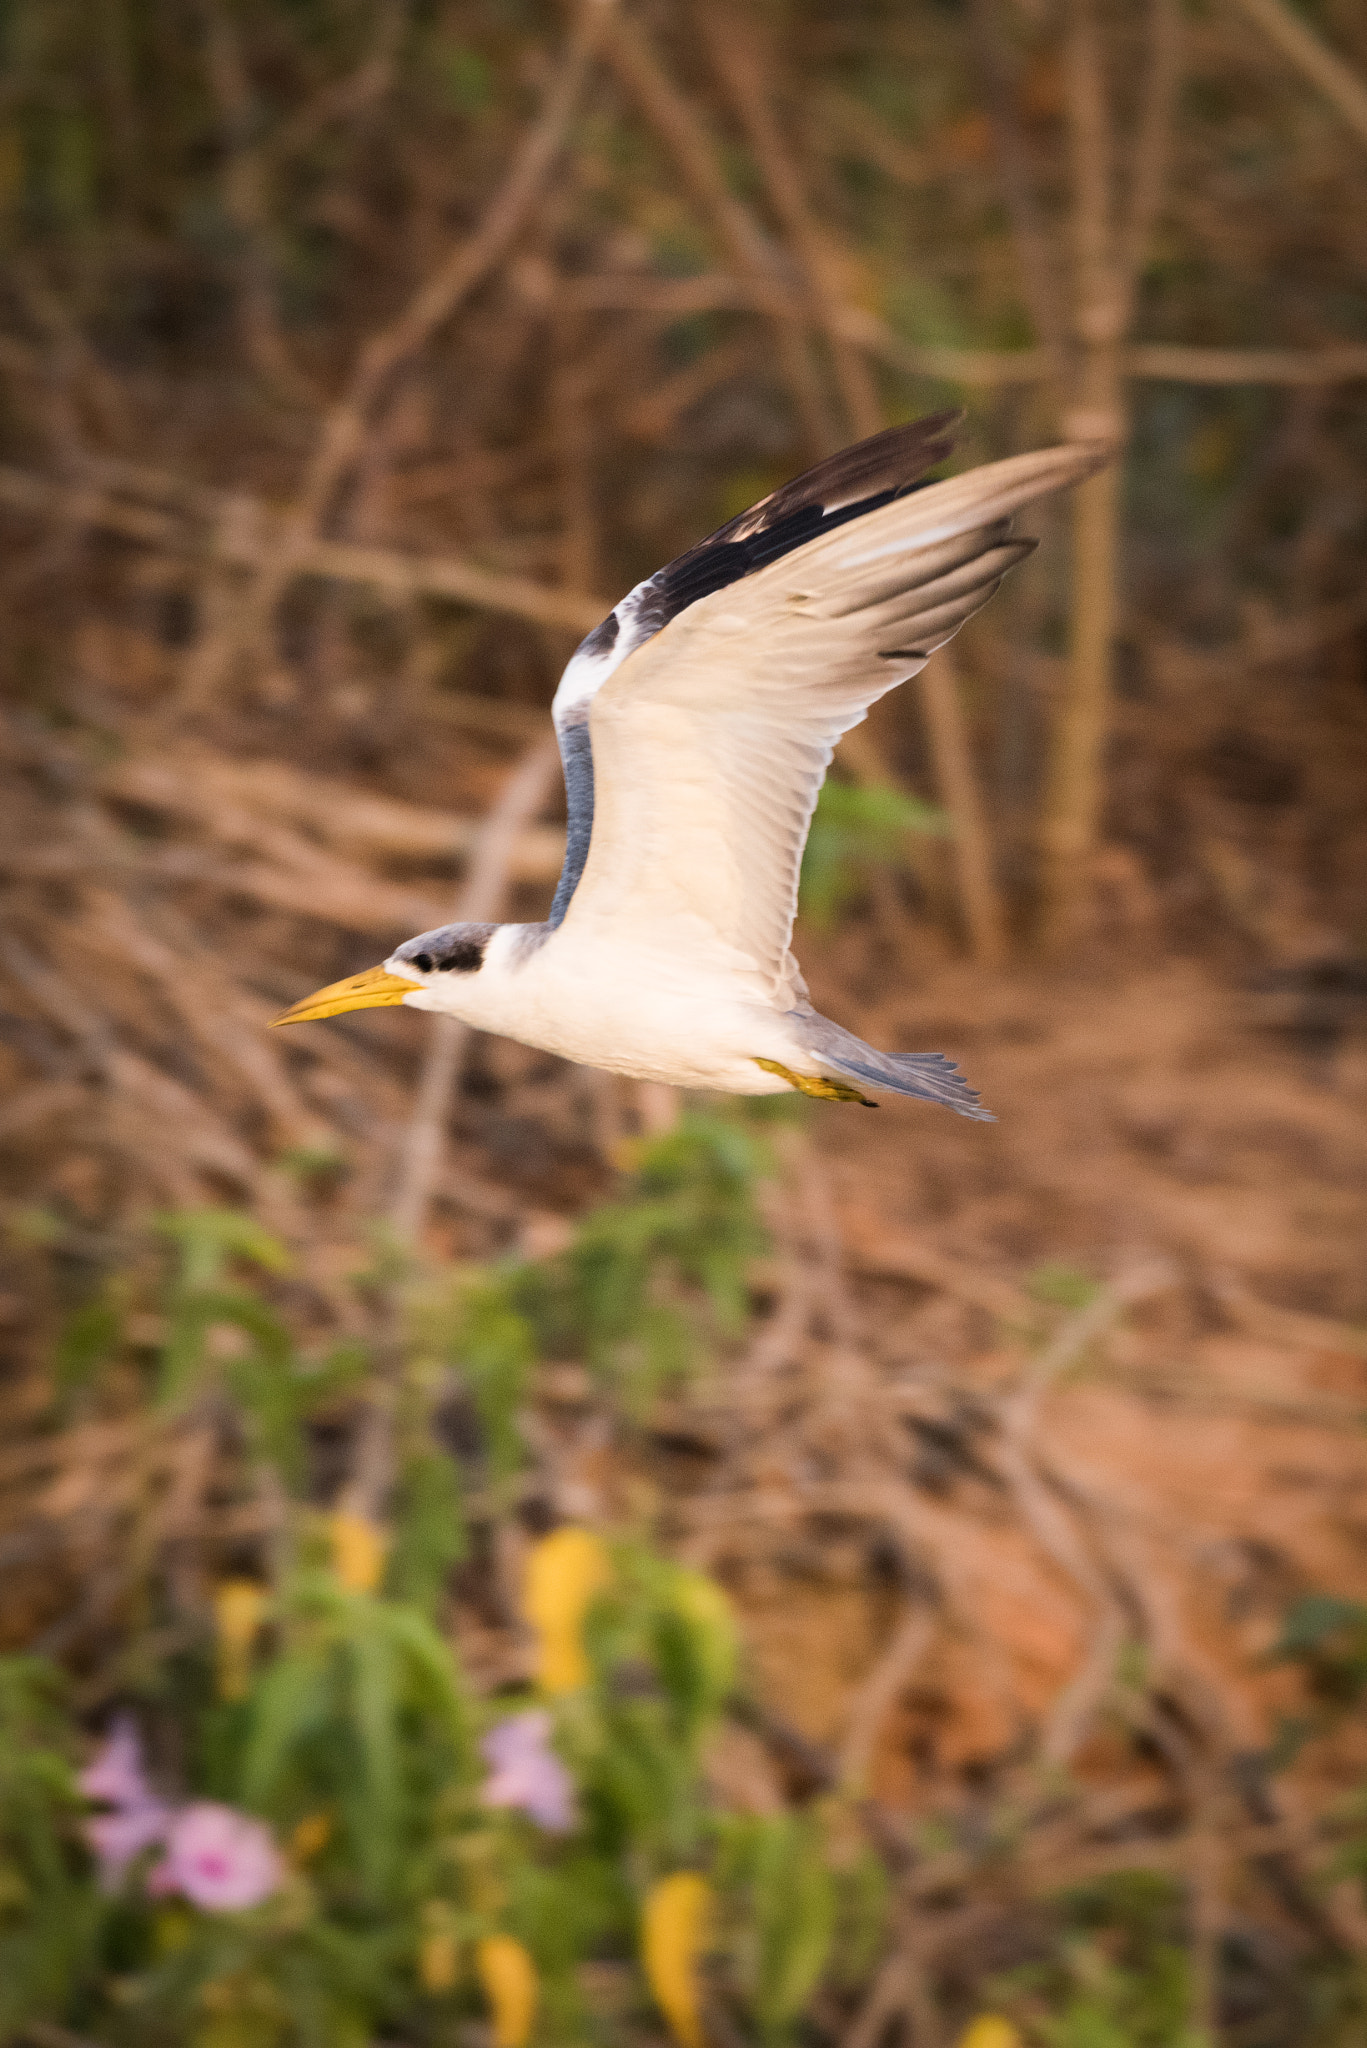 Nikon D810 + Nikon AF-S Nikkor 80-400mm F4.5-5.6G ED VR sample photo. Yellow-billed tern with wings raised over bushes photography